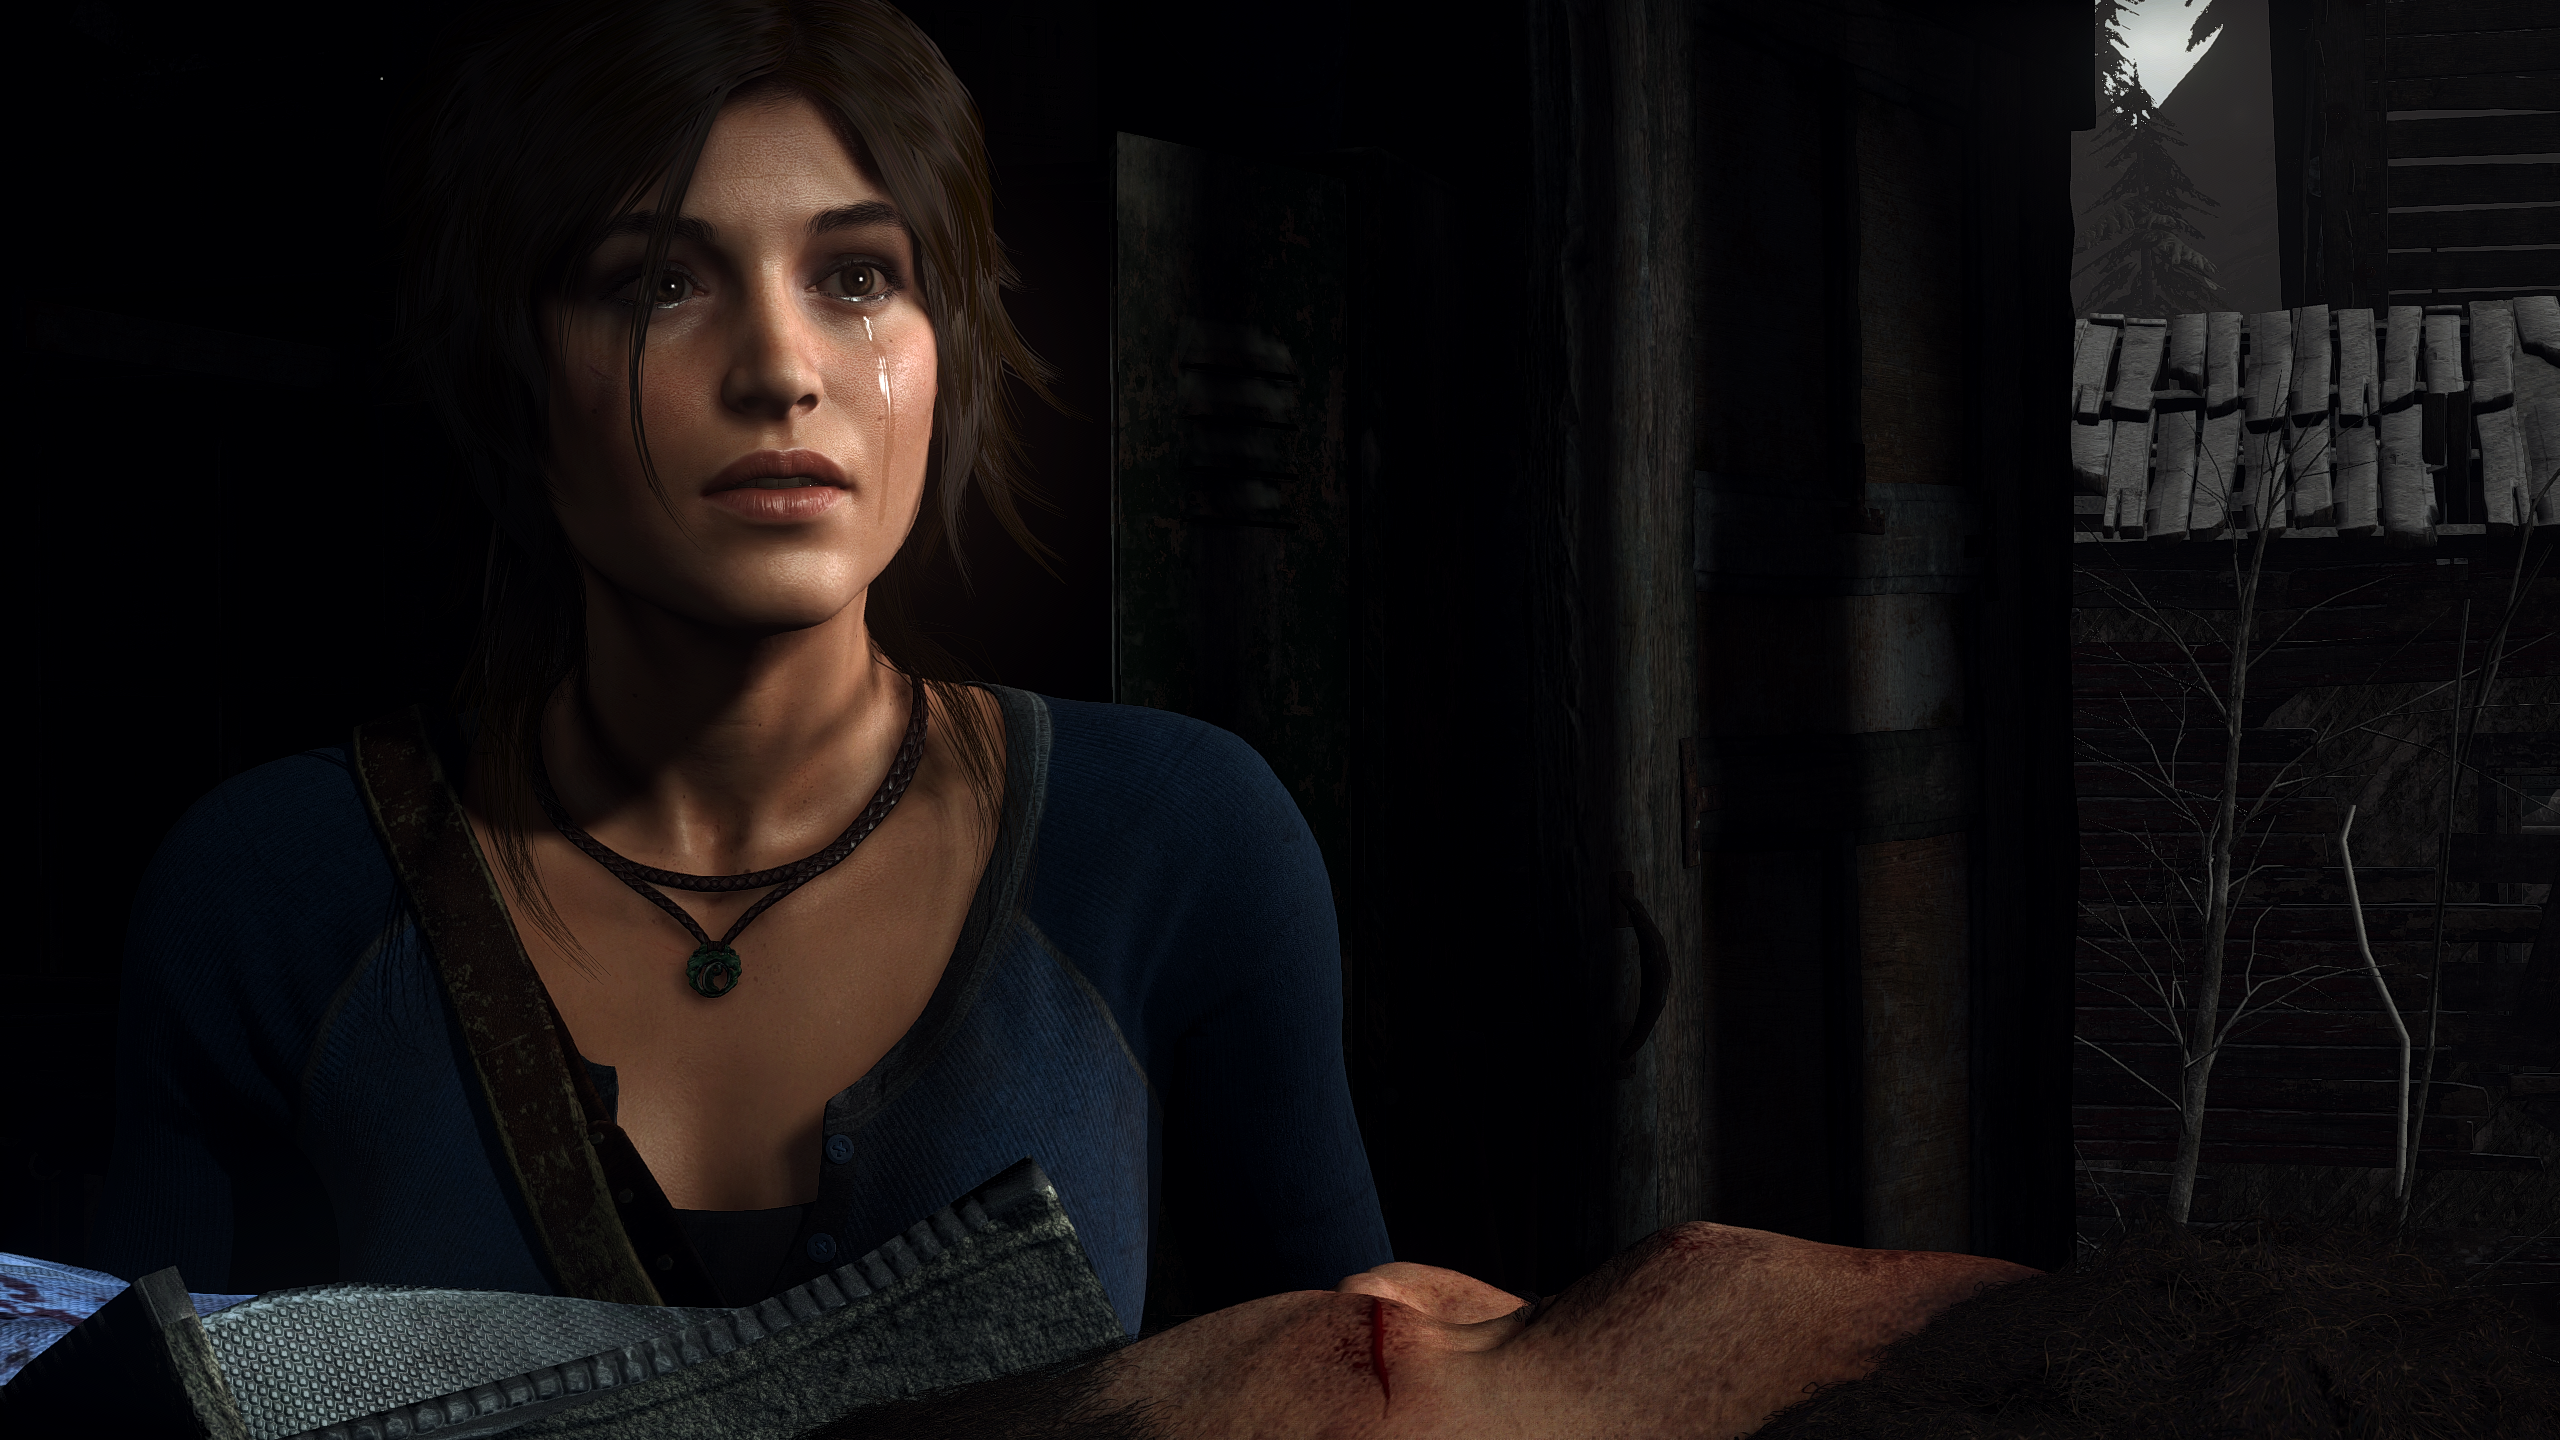 General 2560x1440 Rise of the Tomb Raider video games tears necklace screen shot Lara Croft (Tomb Raider) crying video game girls video game characters PC gaming brunette